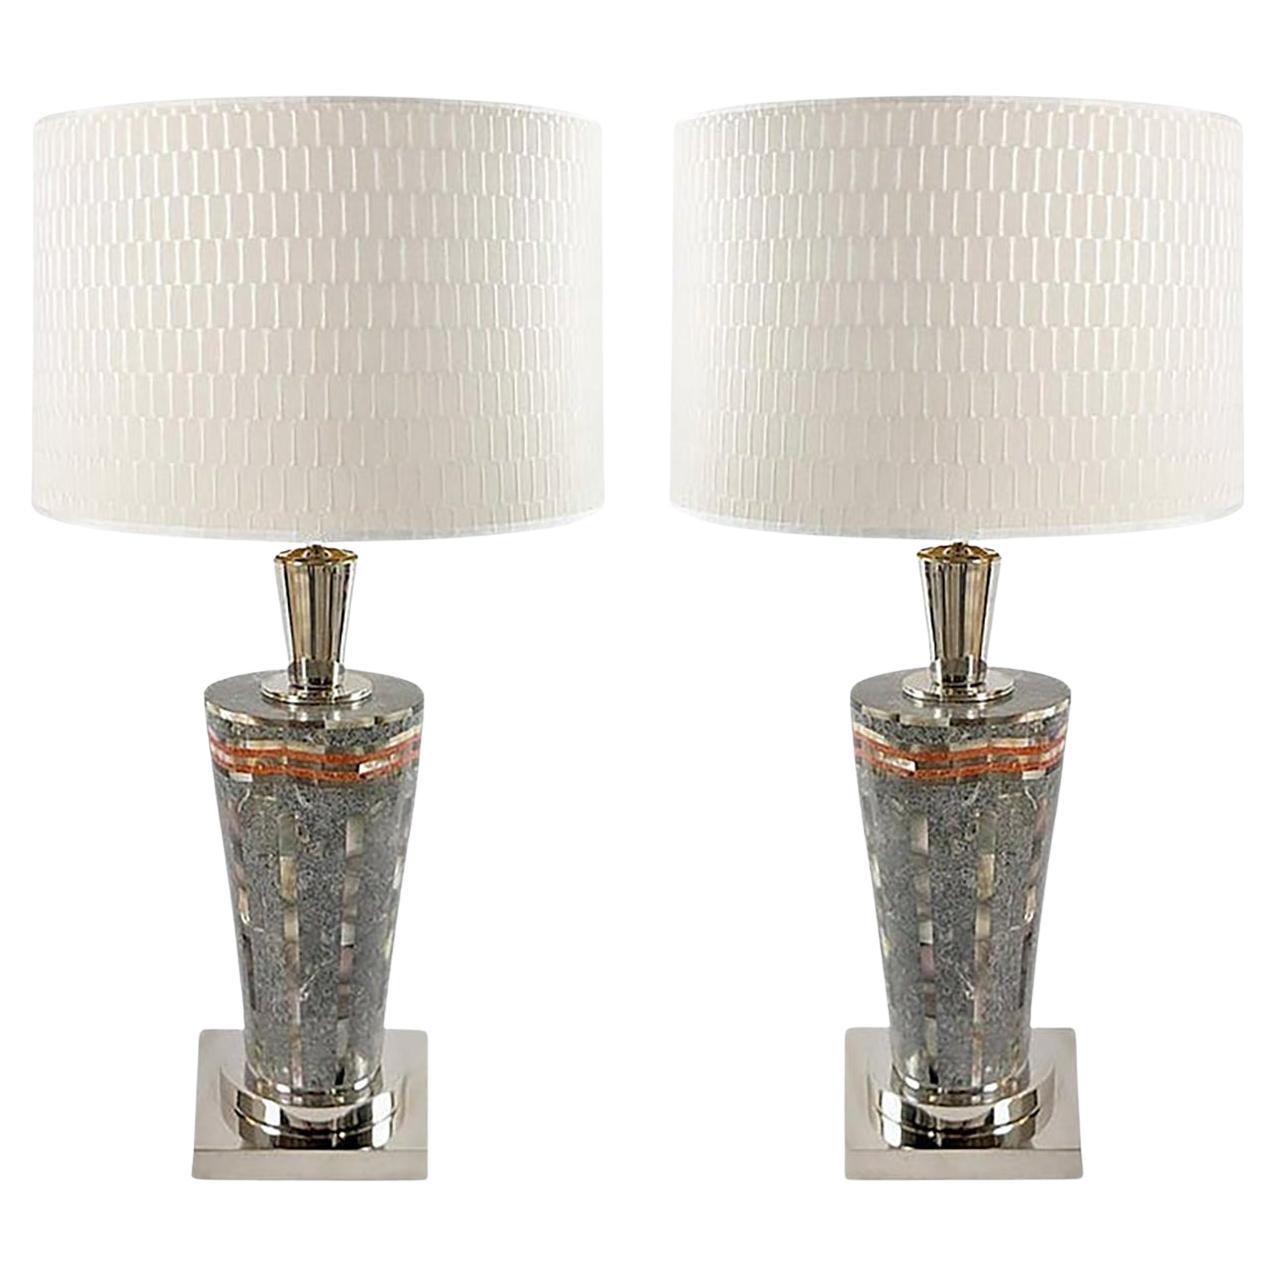 Laudarte Srl of Italy Marble and Mother-Of-Pearl Table Lamps, Pair 